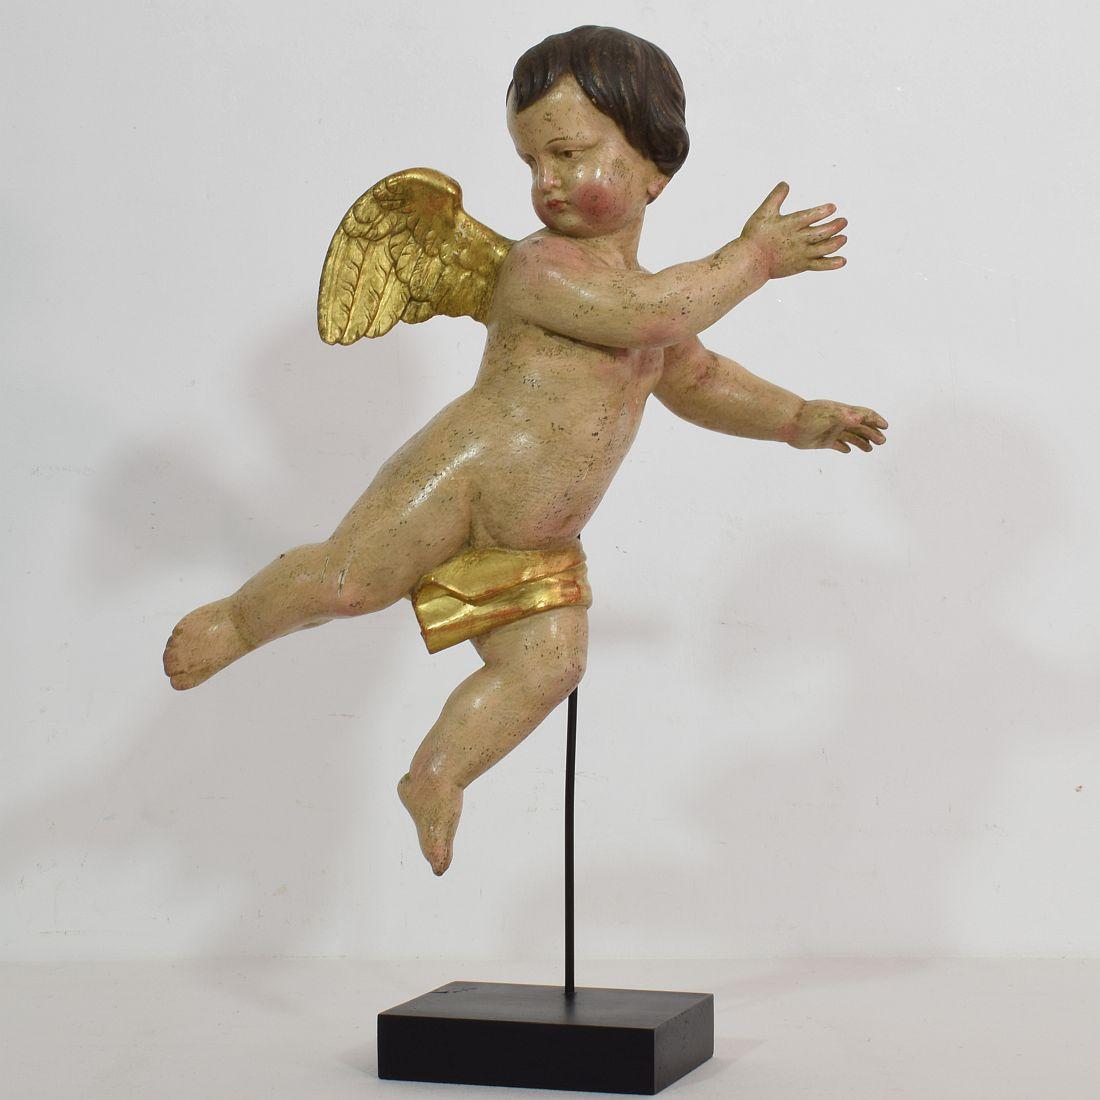 Stunning small carved wooden Baroque angel.
Very beautiful item,
Italy, circa 1790. Weathered and small losses.
Measurement includes the wooden base.
More pictures available on request.